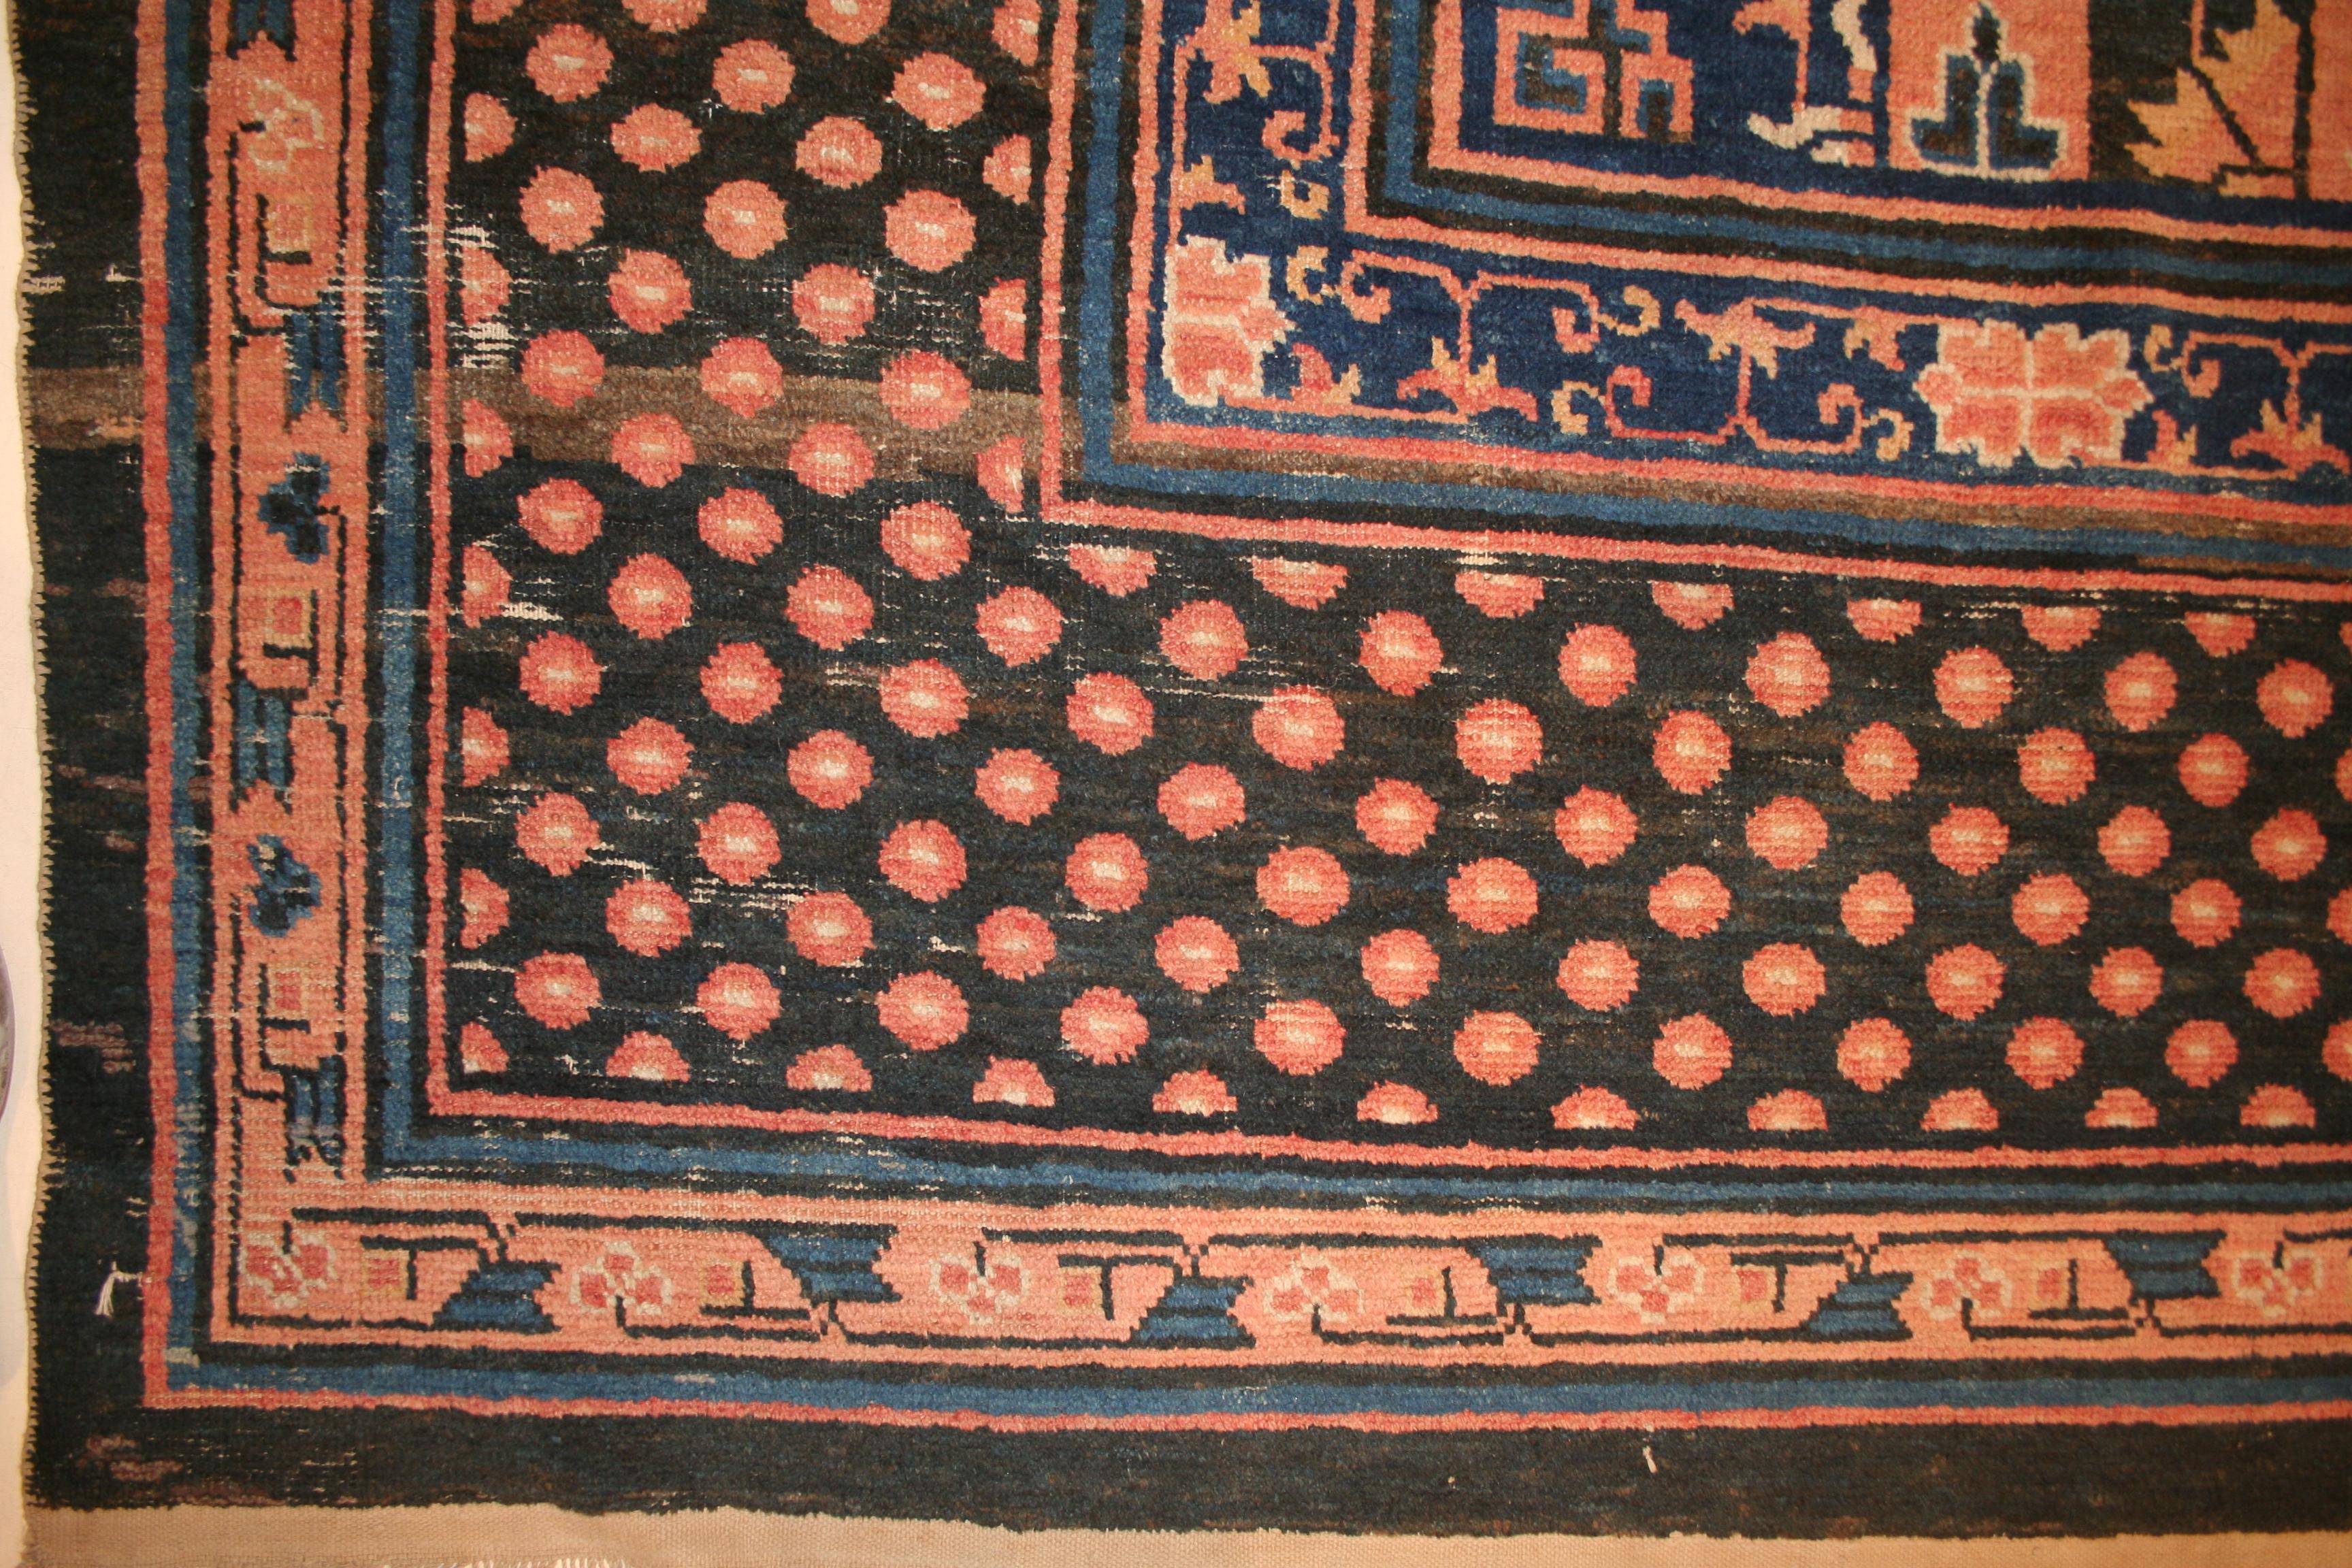 A very rare and elegant oversized Kansu carpet, distinguished by a quincuncial pattern composed by a central Mandala roundel and four quartered elements in the corners, overlaid on a dark blue background embellished by an infinite repeat of small